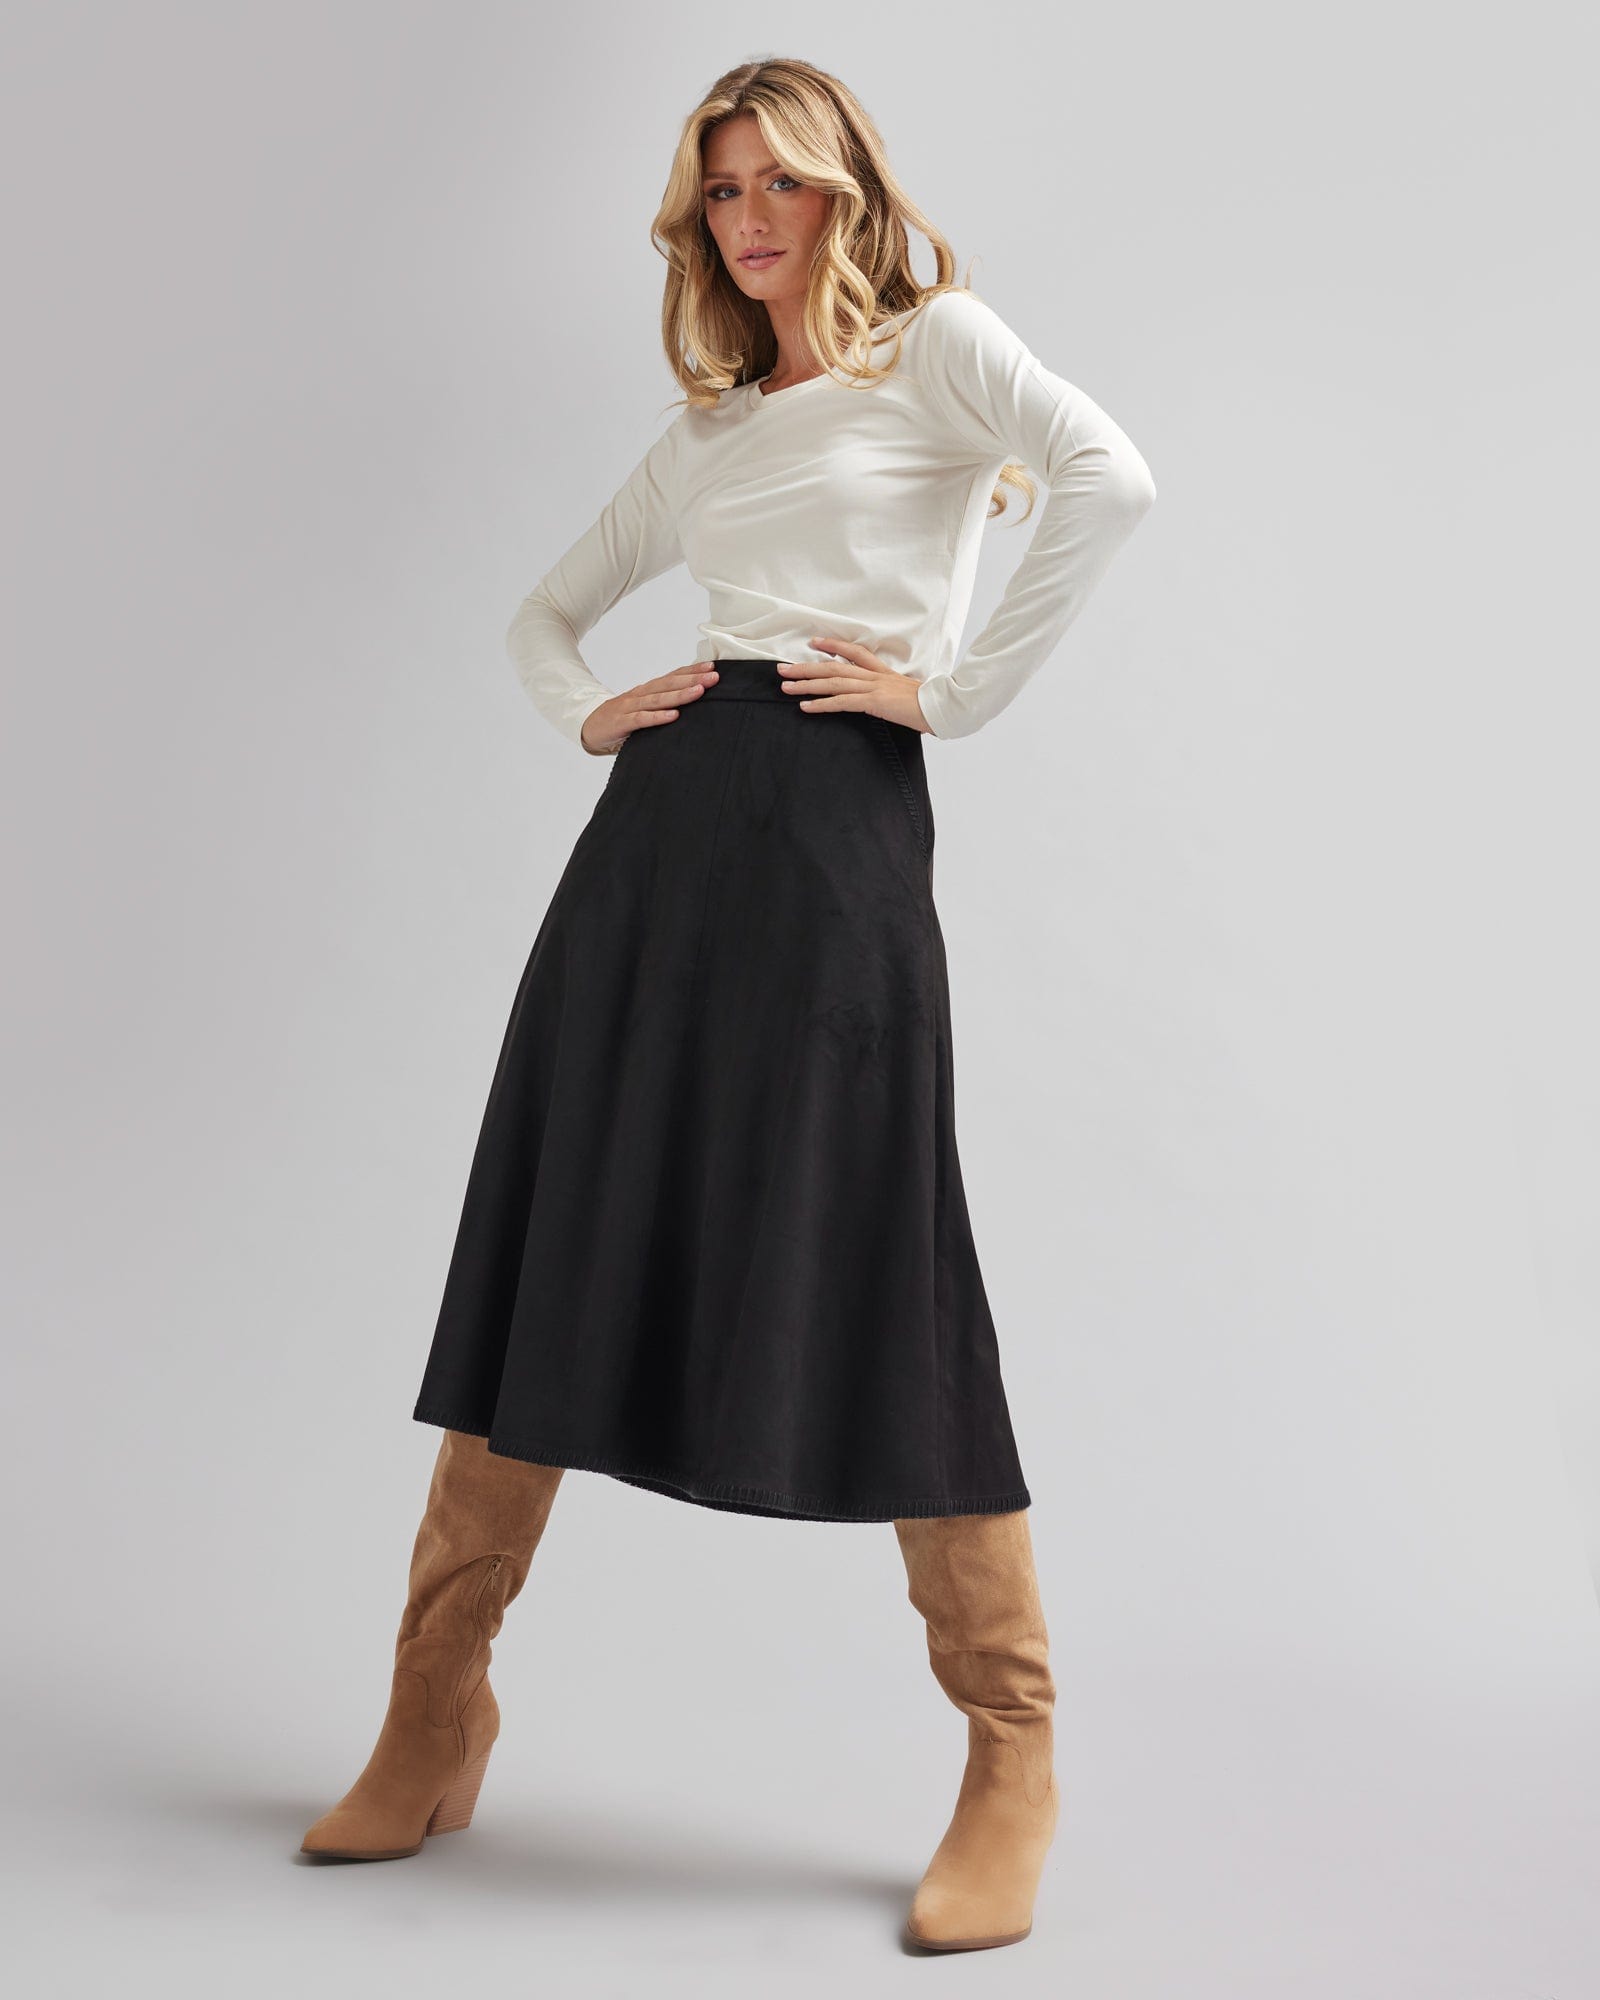 Woman in a black, midi-length, suede skirt